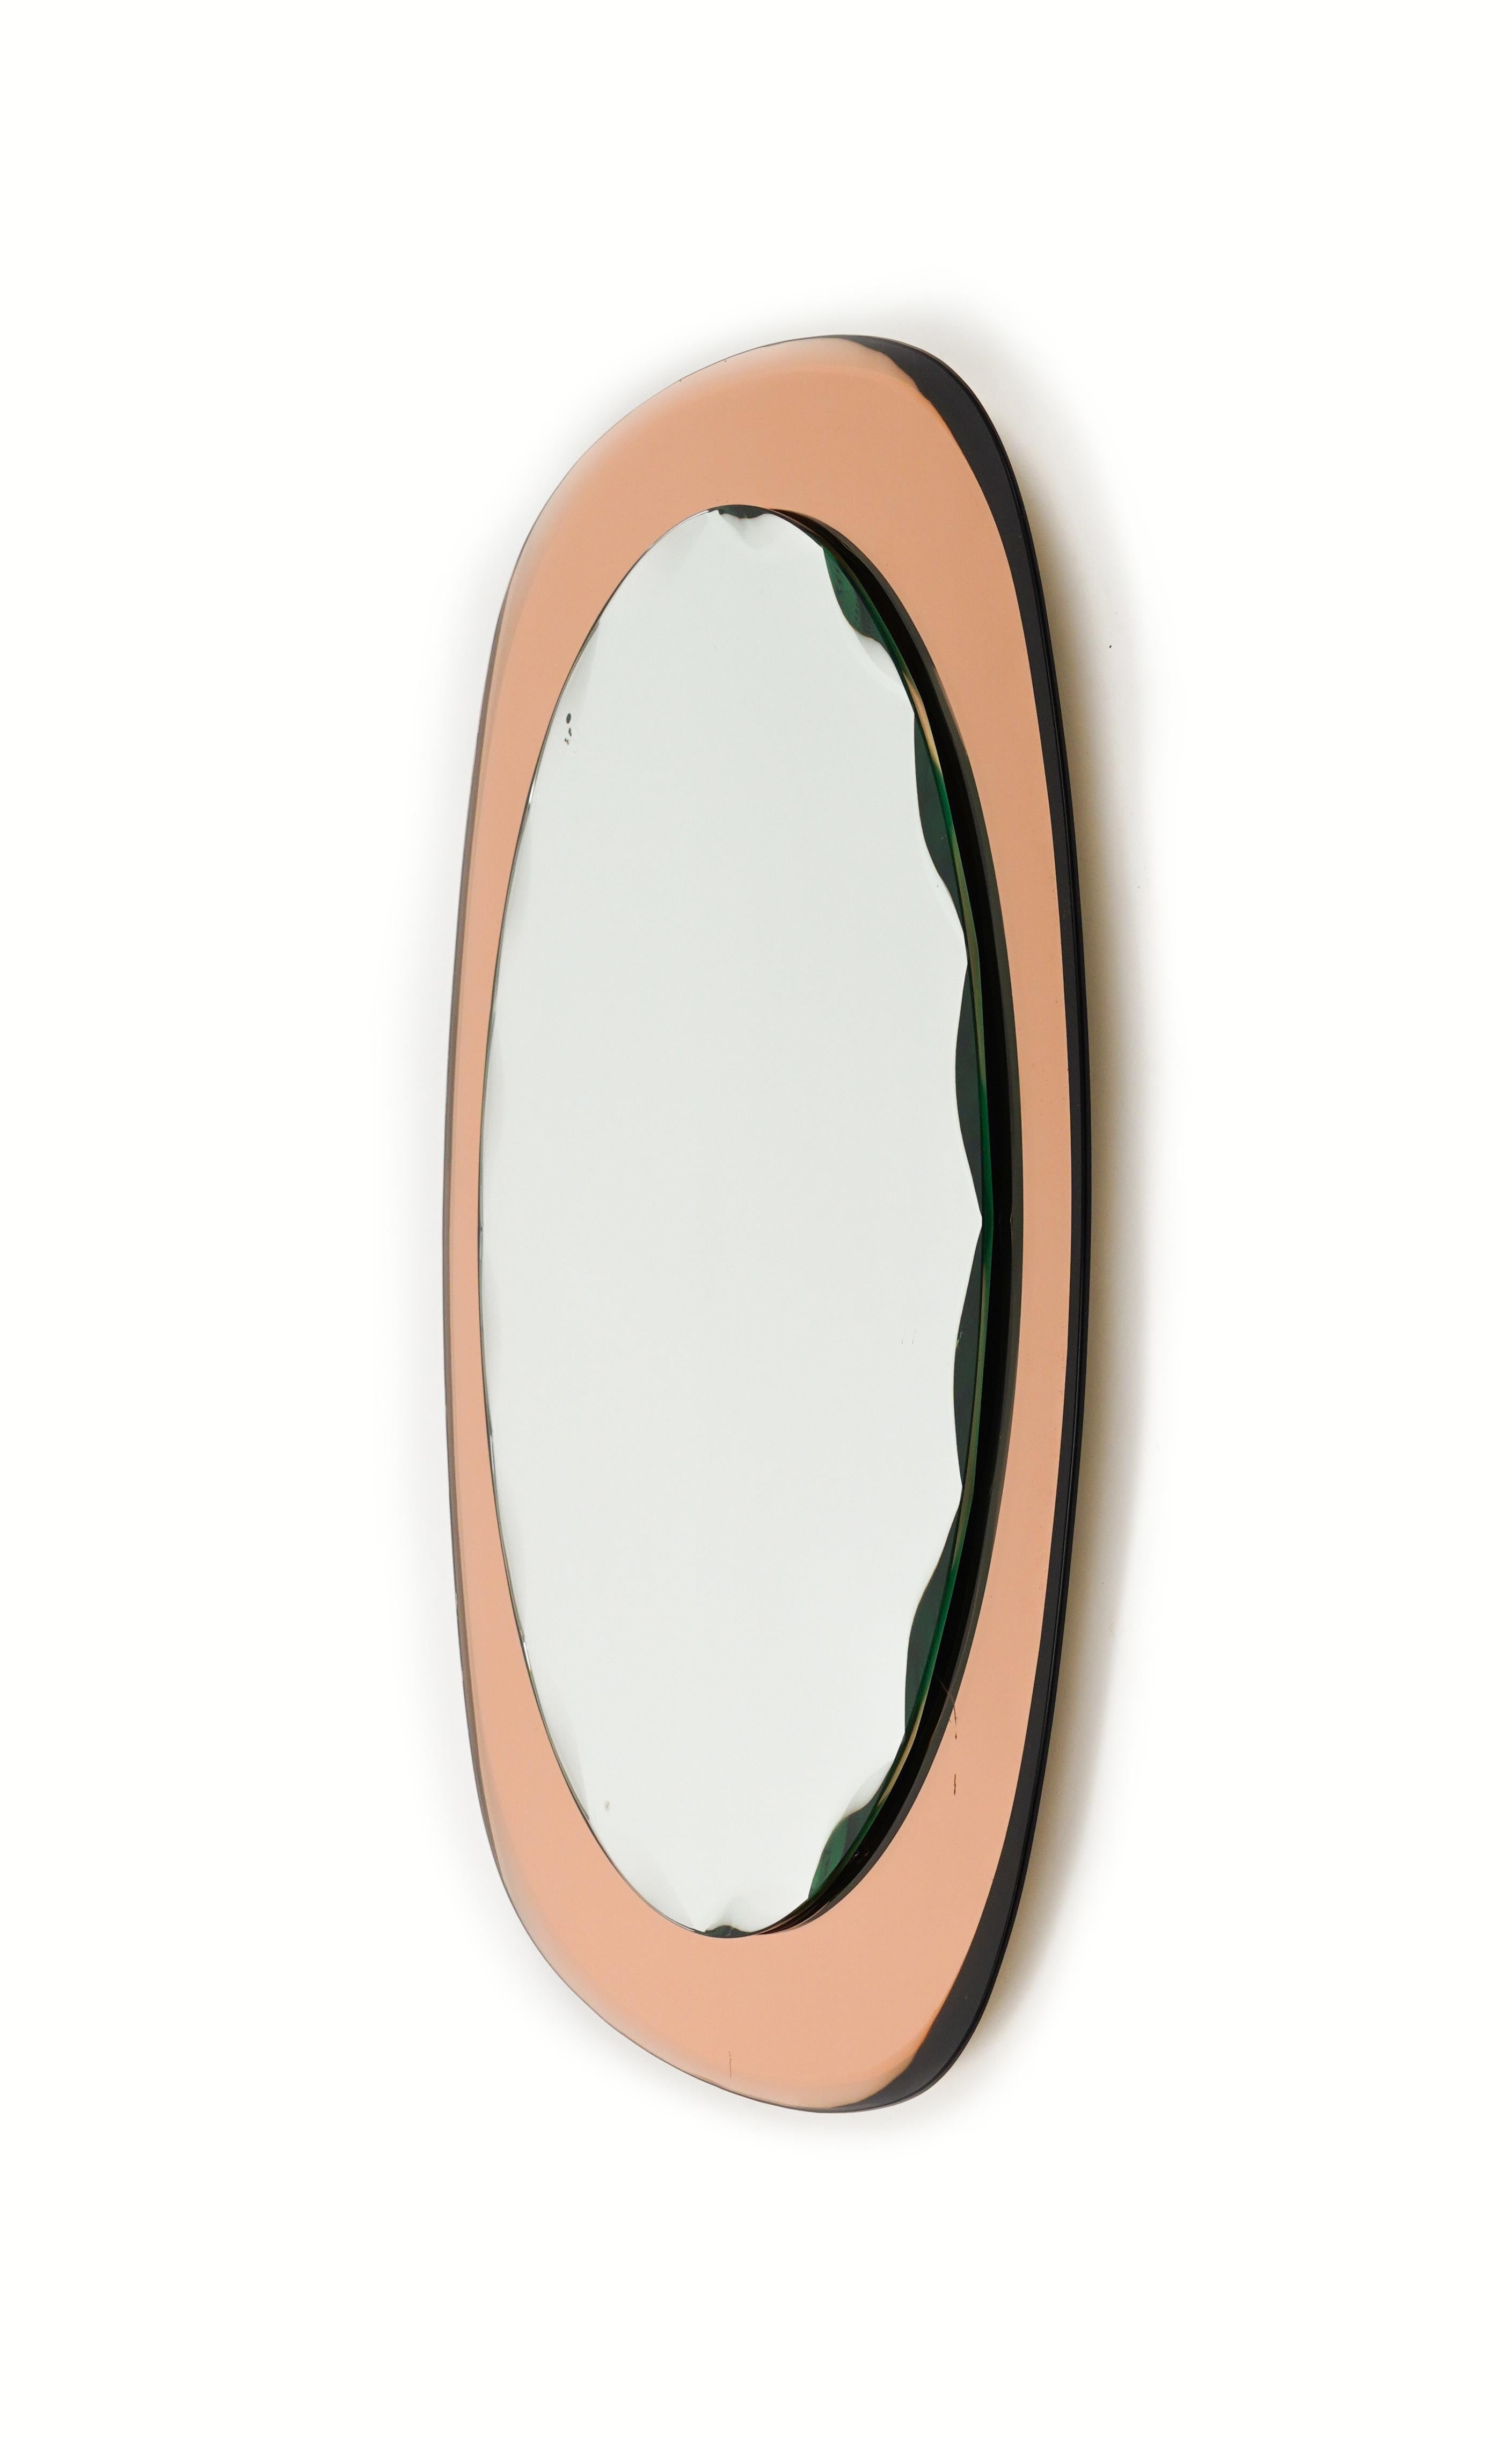 Metal Midcentury Oval Wall Mirror rose gold Glass Frame by Cristal Arte, Italy 1960s For Sale